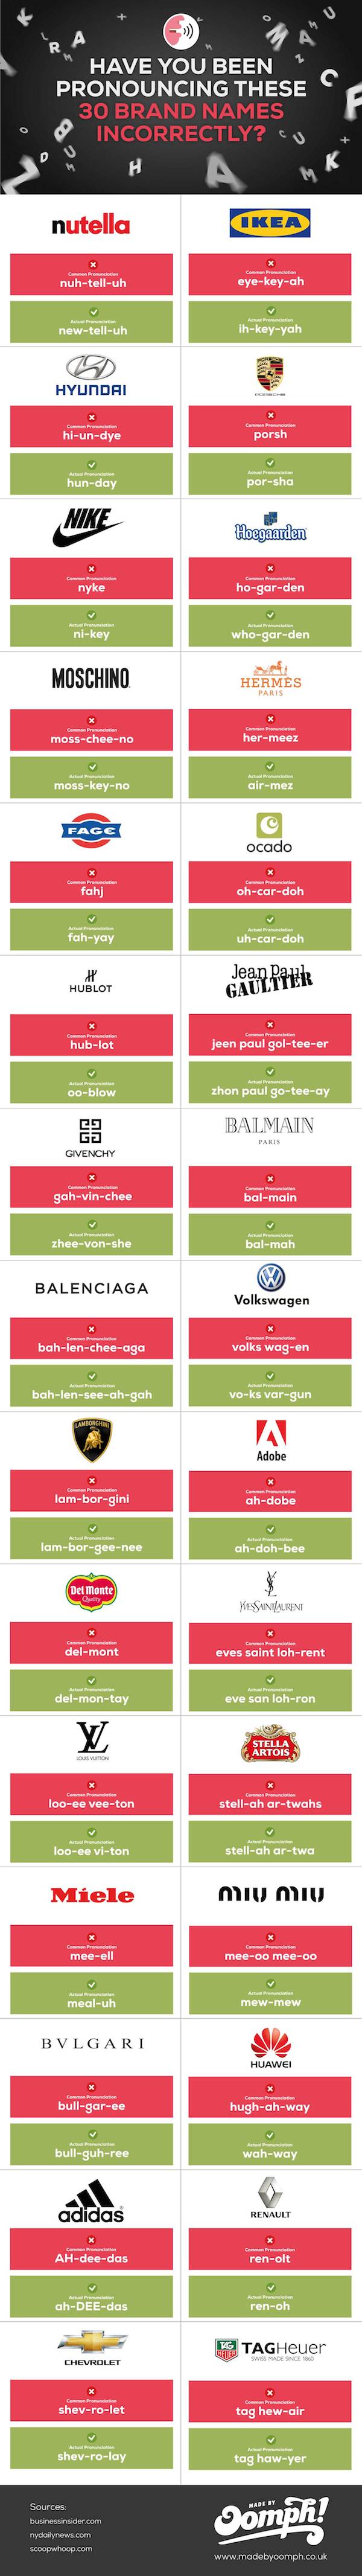 hard-to-pronounce-brand-names-infographic